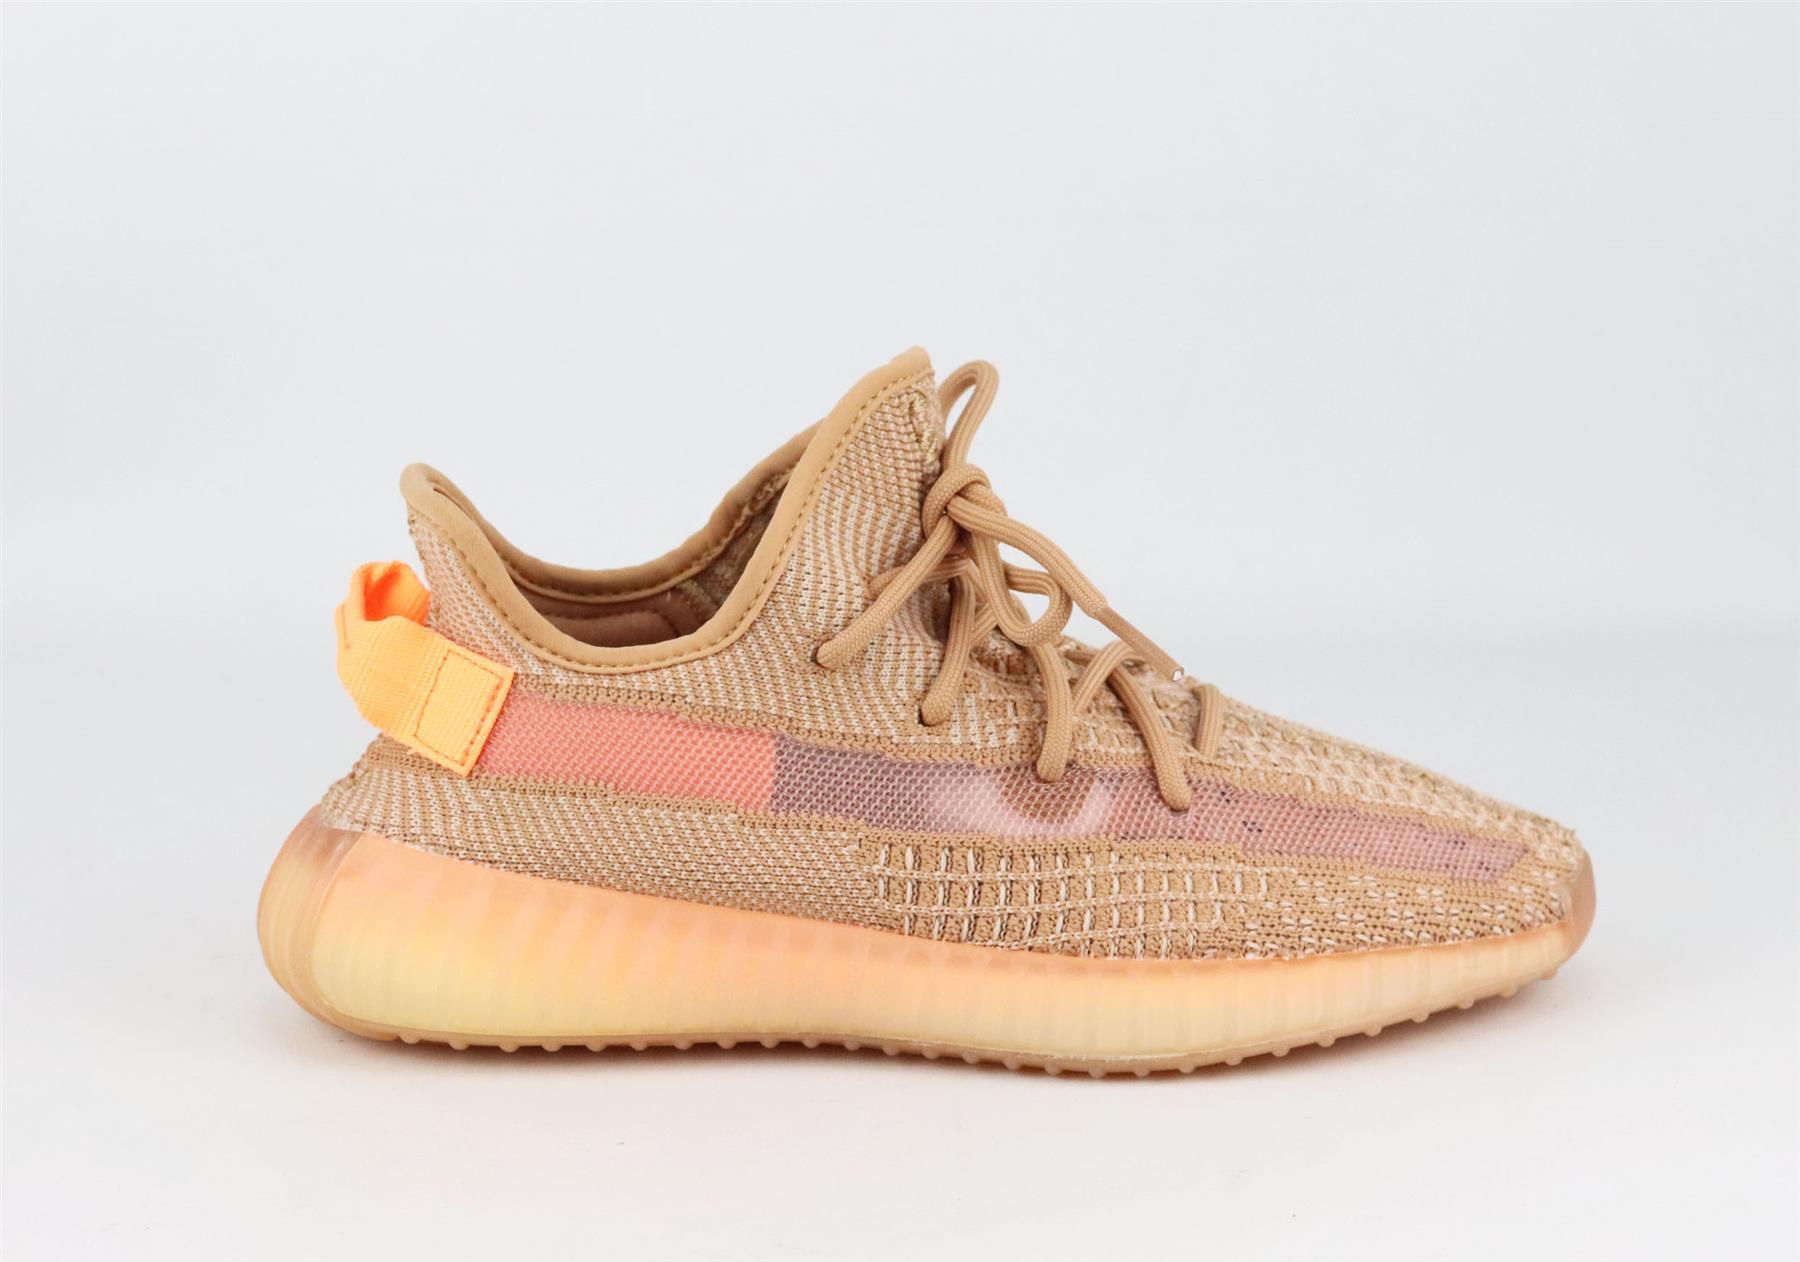 With the track record of adidas Originals and Kanye West's past sell-out styles, you may want to read this quite quickly, these 'Yeezy Boost 350 V2' sneakers are the latest iteration of the coveted design, made from the label's soft Primeknit in